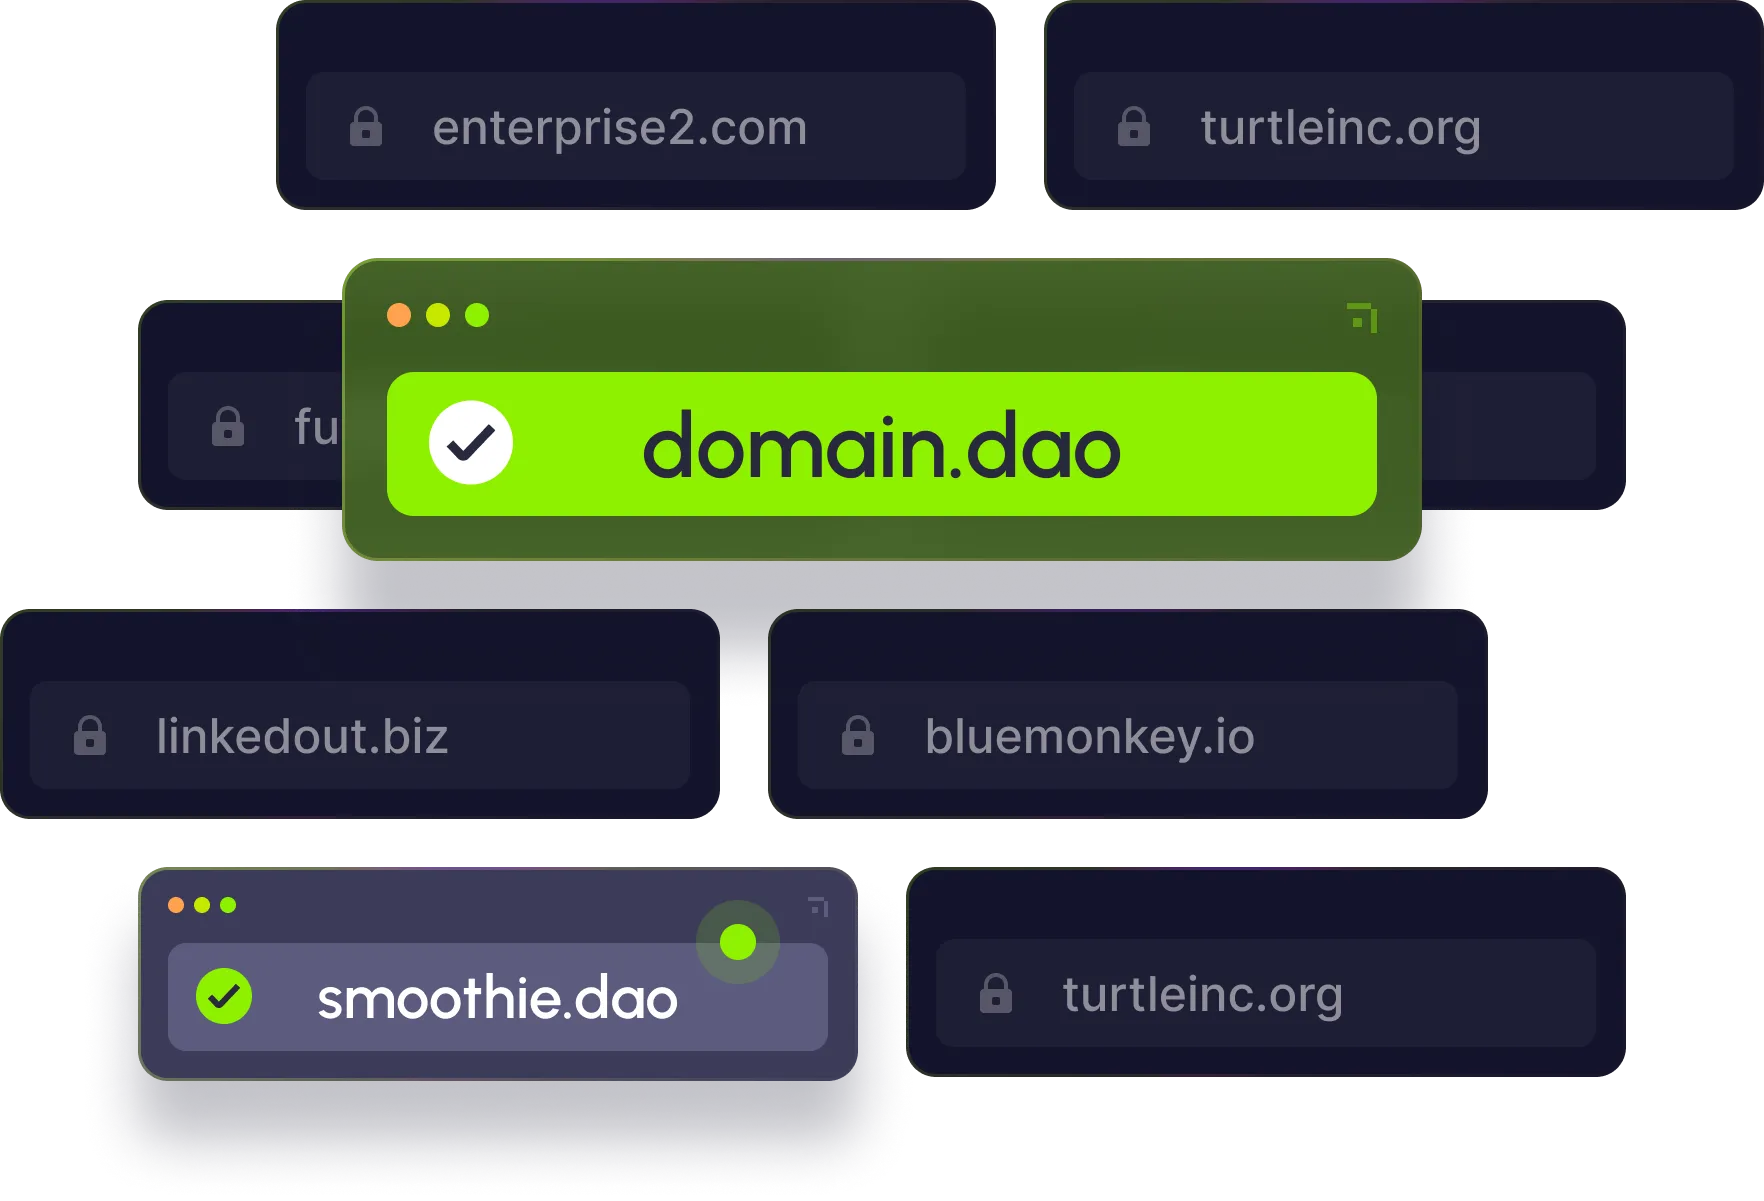 .dao domain standing out between other domains